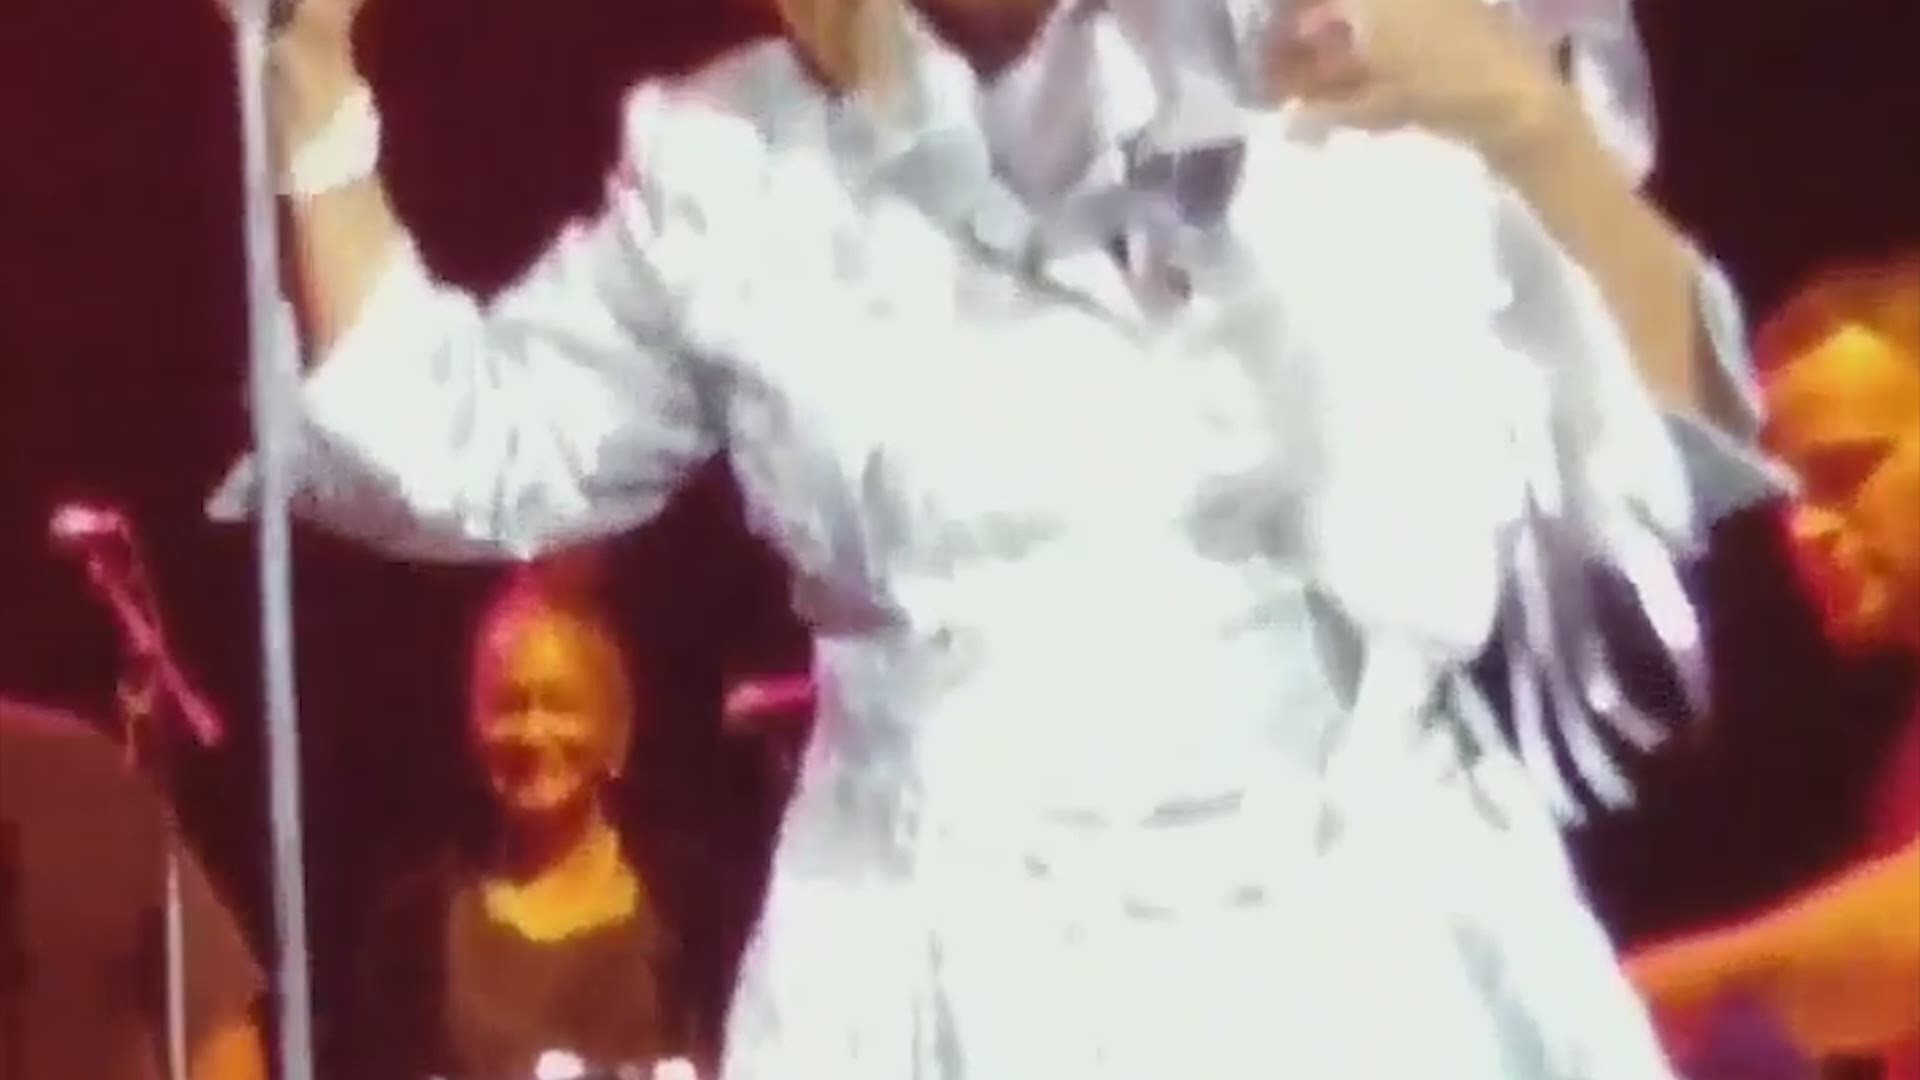 A 27-year-old man from Baytown had a "breathtaking" experience Saturday night when he got the chance to meet Patti Labelle.